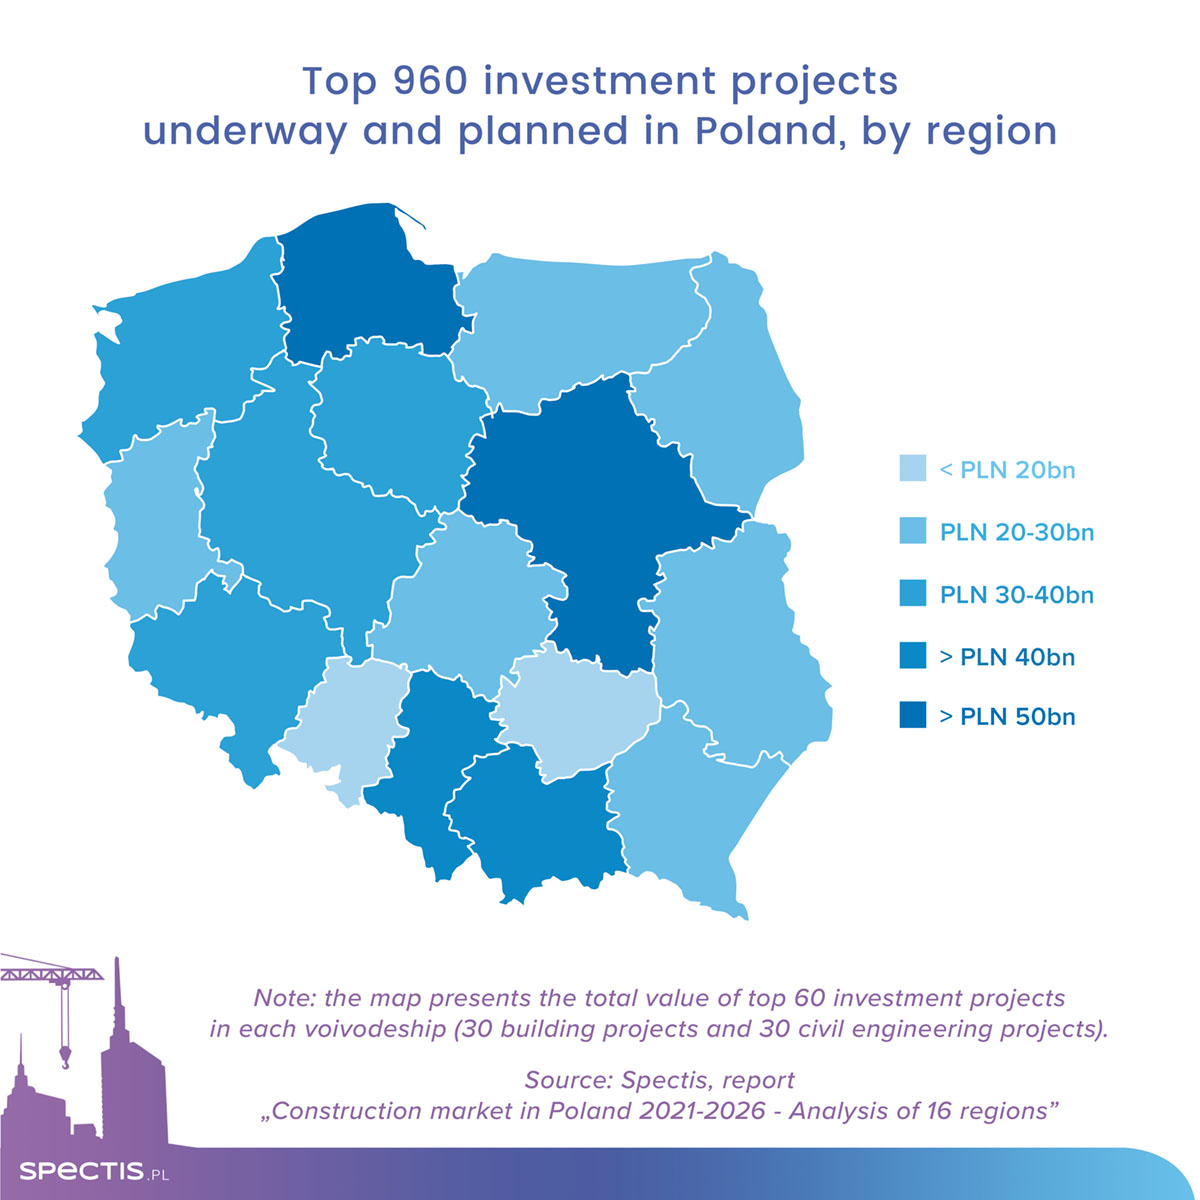 €150bn for nearly thousand large-scale projects in Poland